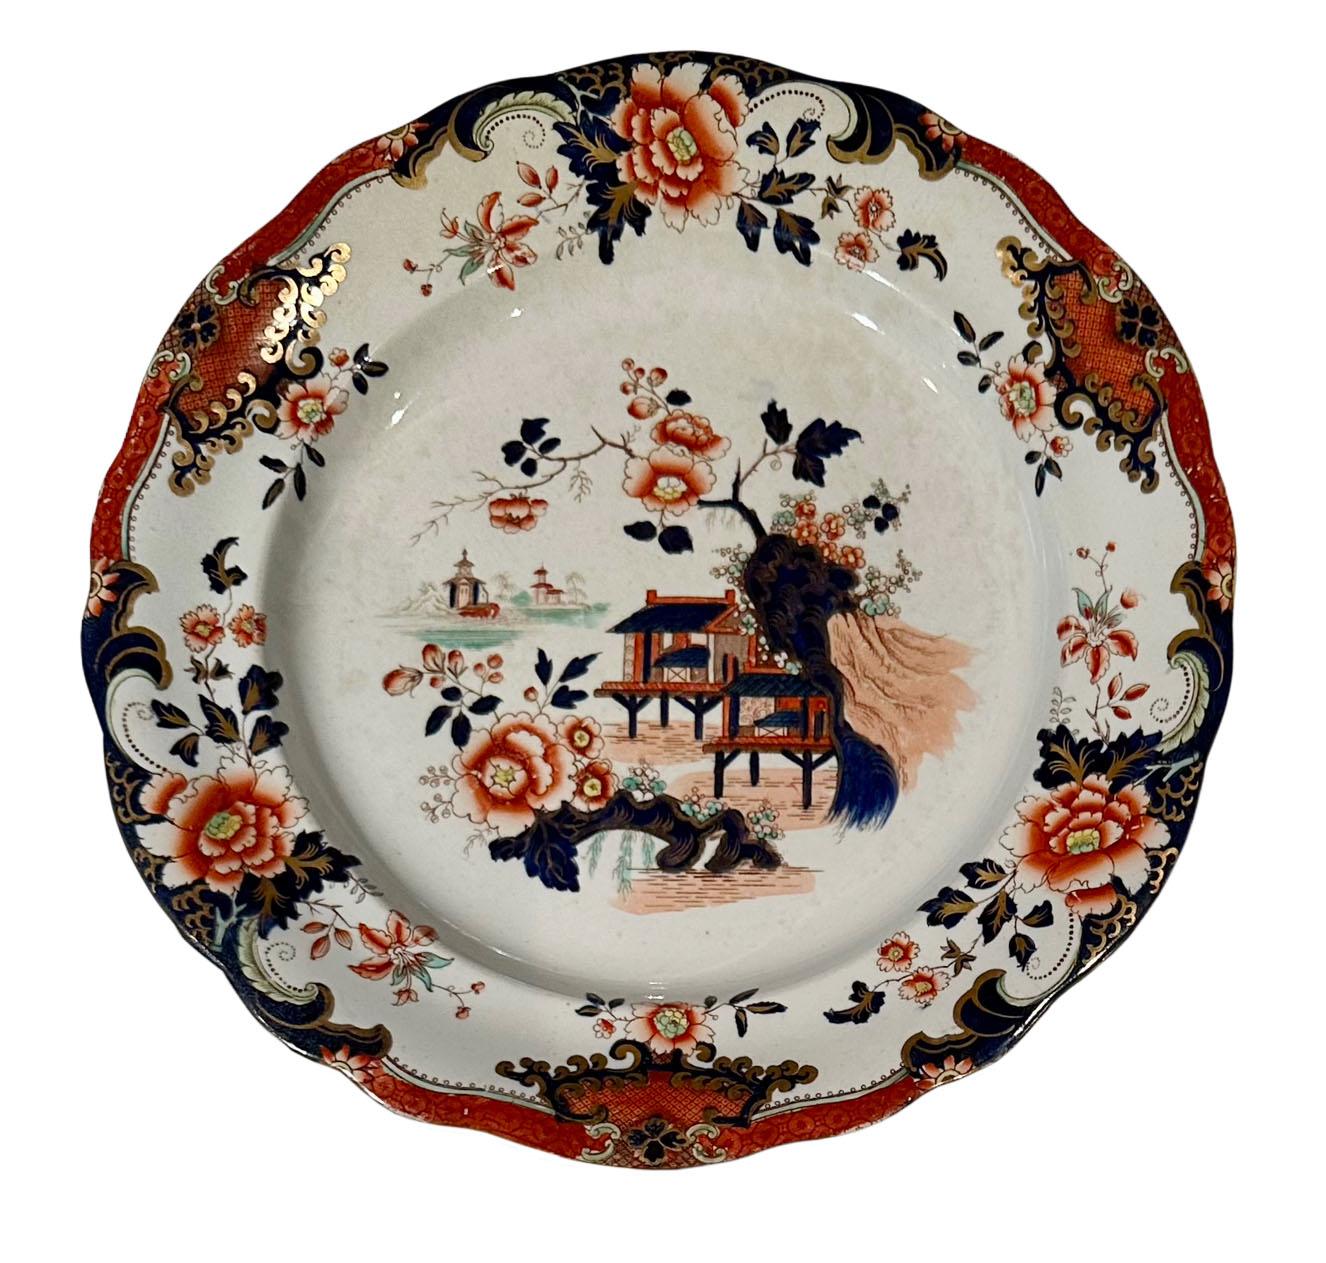 A pair of late 19th century Mason's Ironstone plates. English chinoiserie in the Chinese taste.